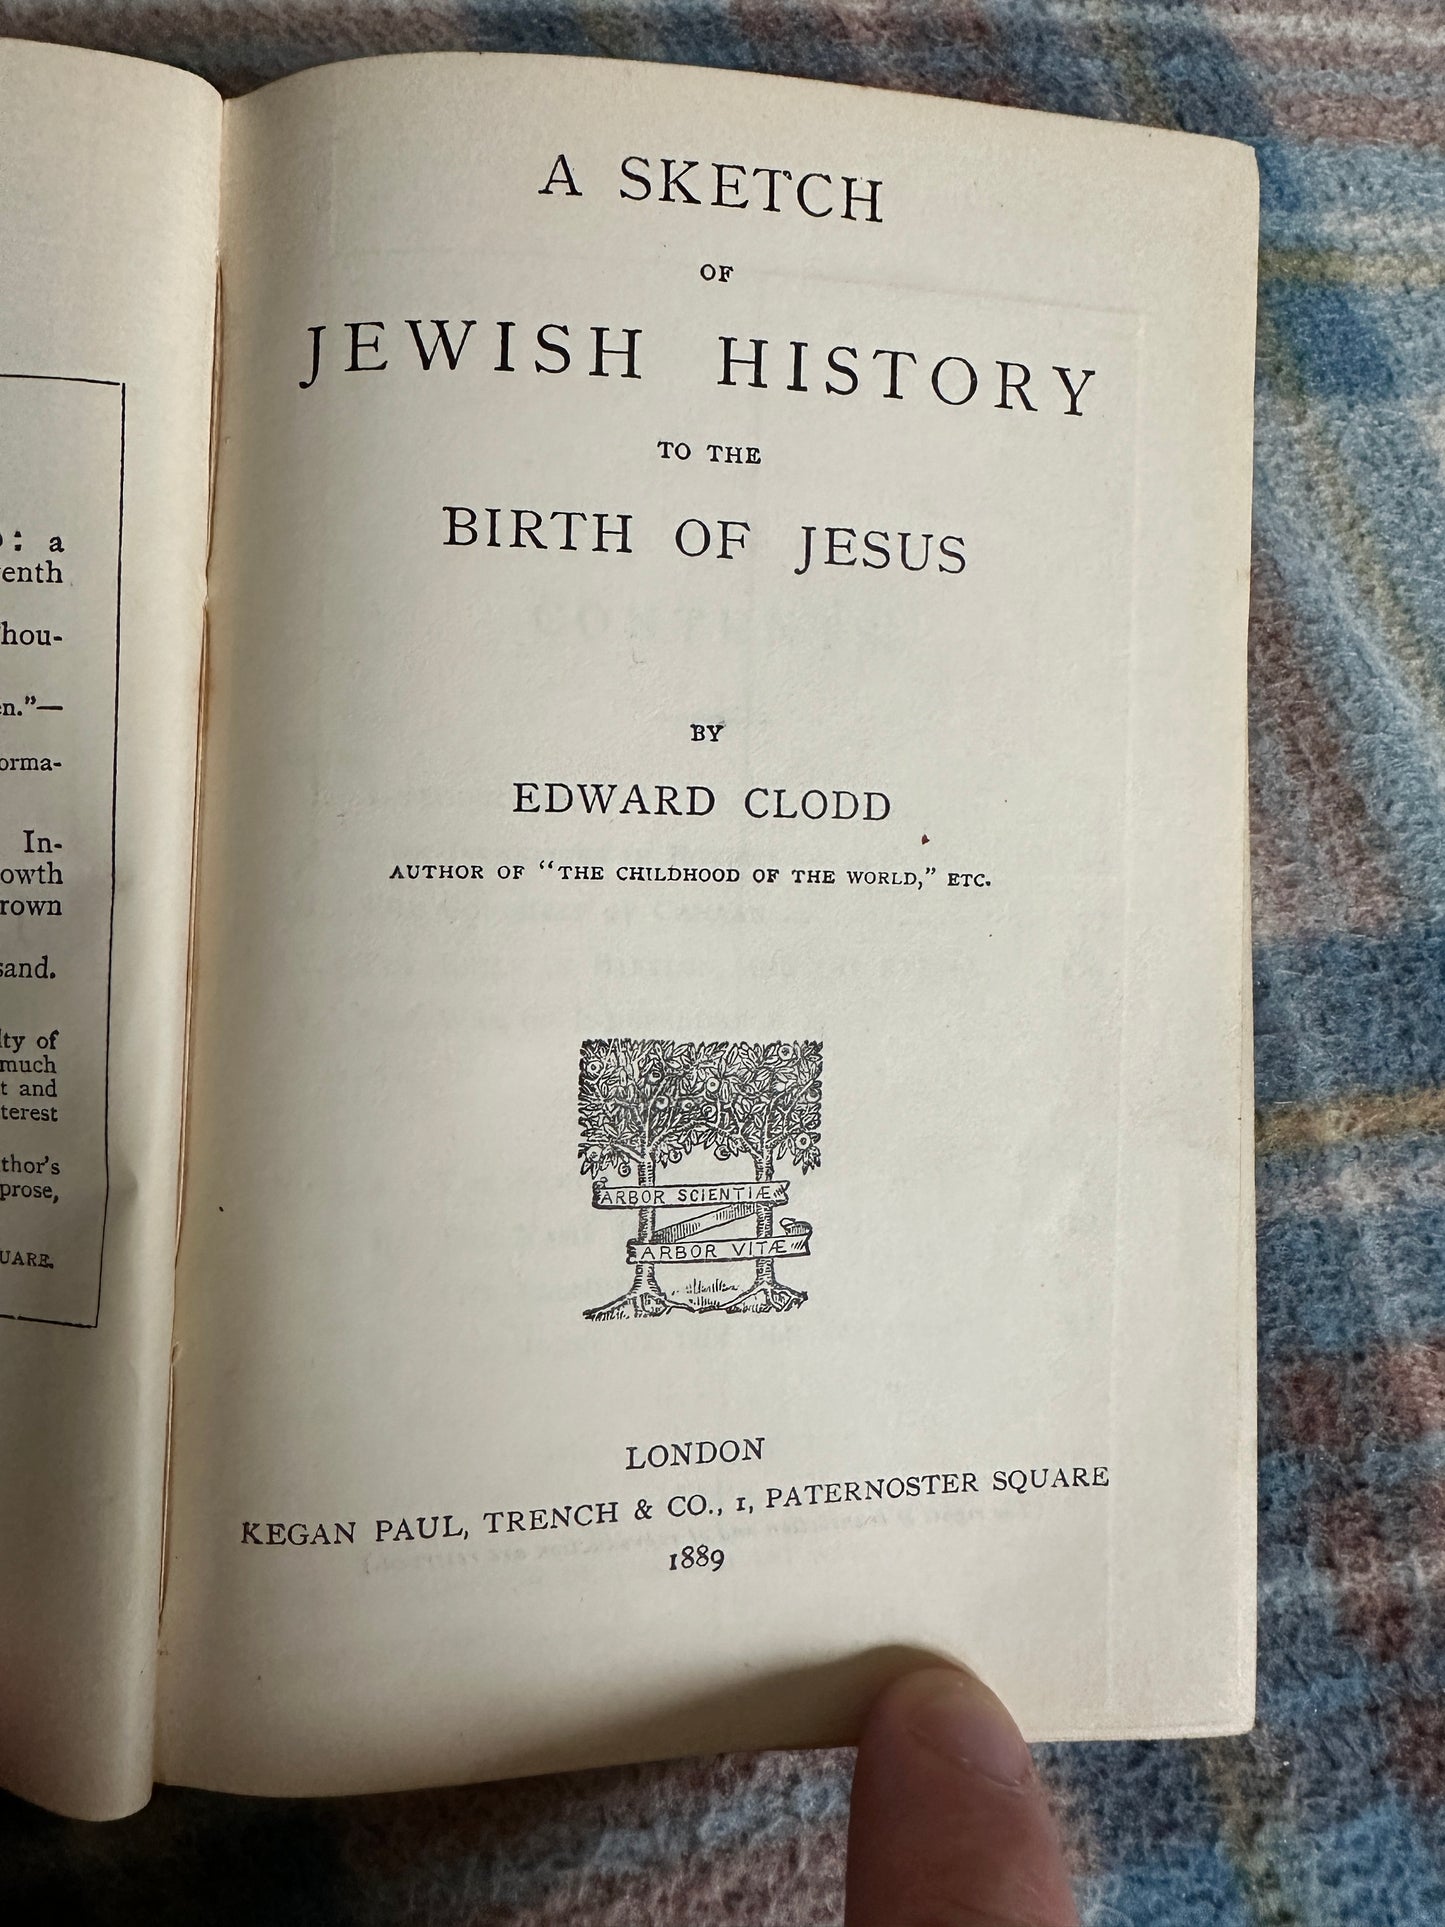 1889 A Sketch of Jewish History To The Birth Of Jesus - Edward Clodd(Kegan Paul, Trench & Co)